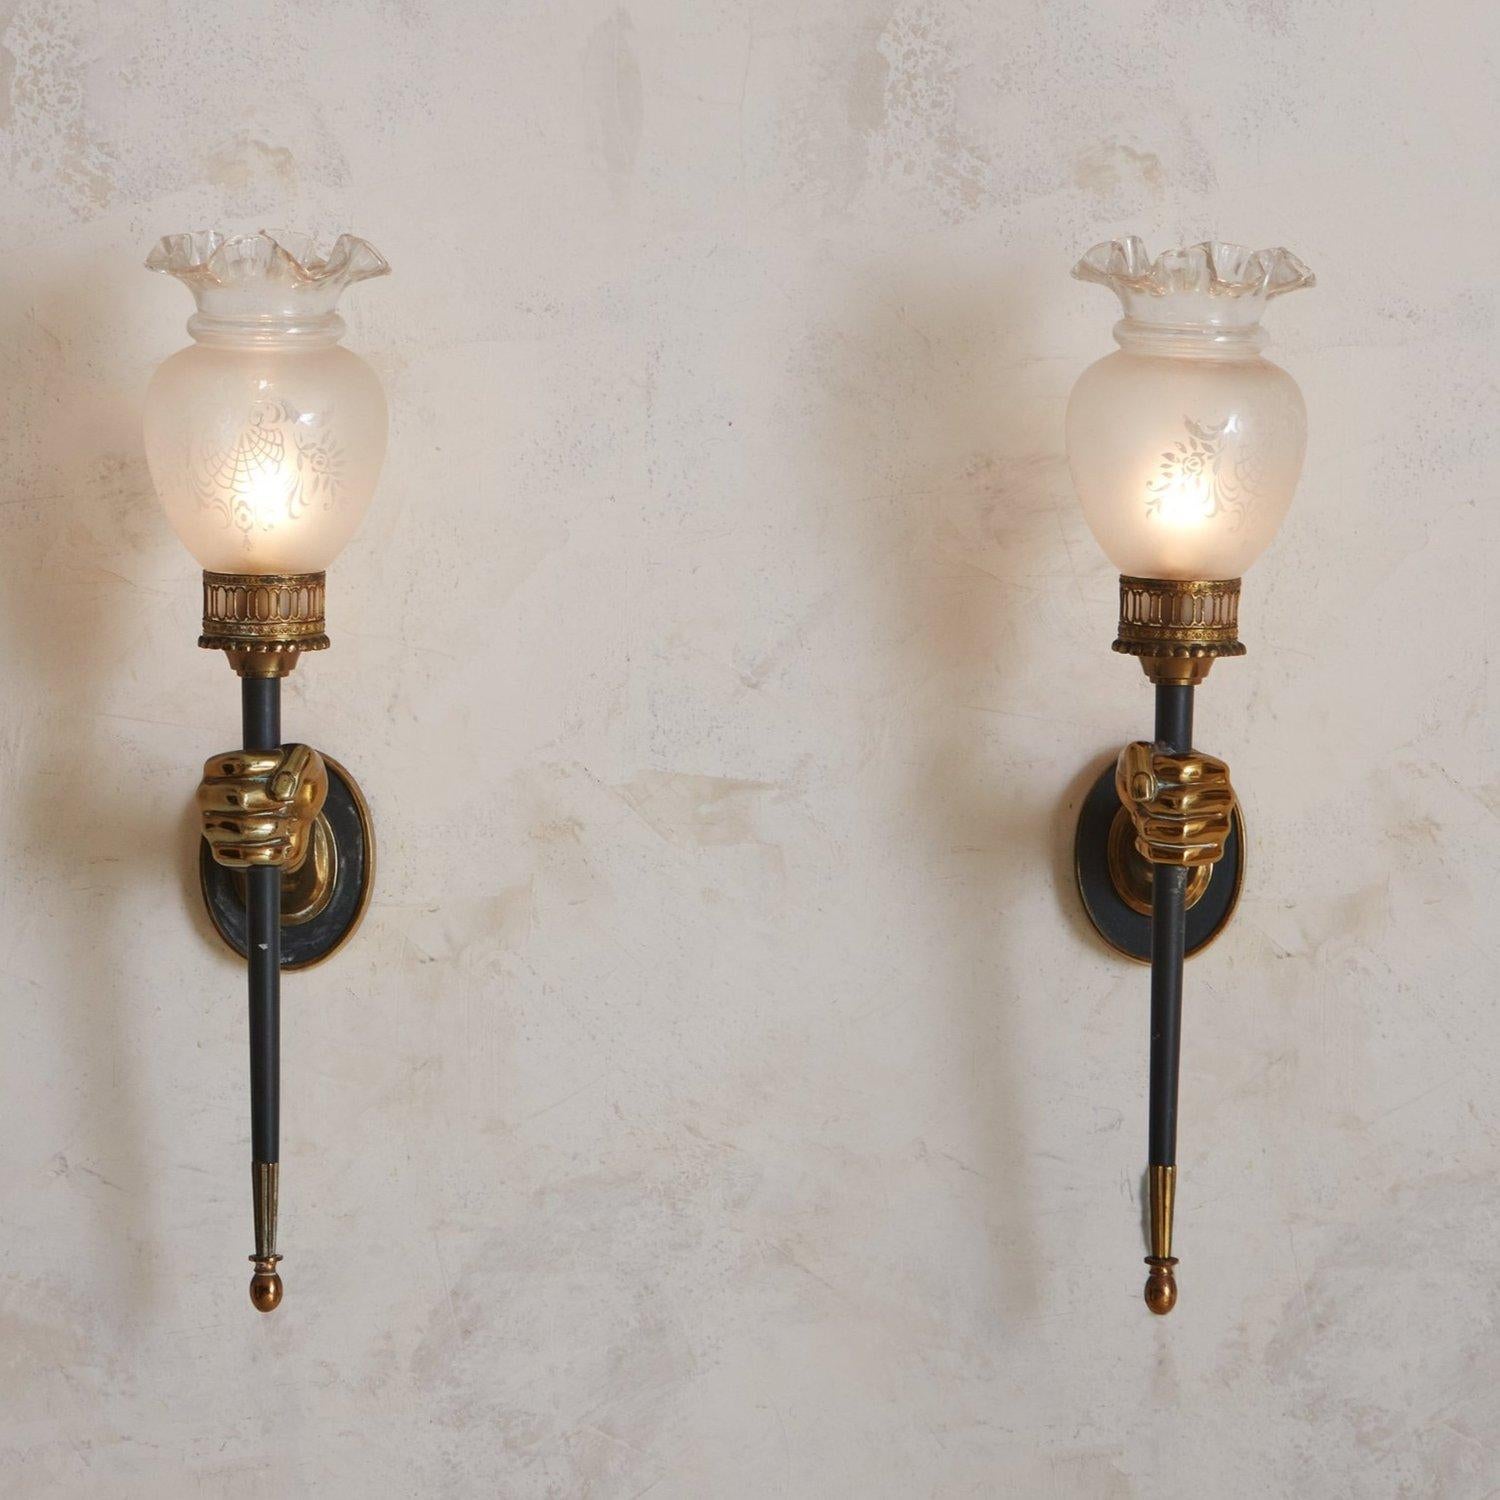 Mid-Century Modern Pair of Bronze Torchiere Sconces With Hand Motif by Maison Jansen, France 1960s